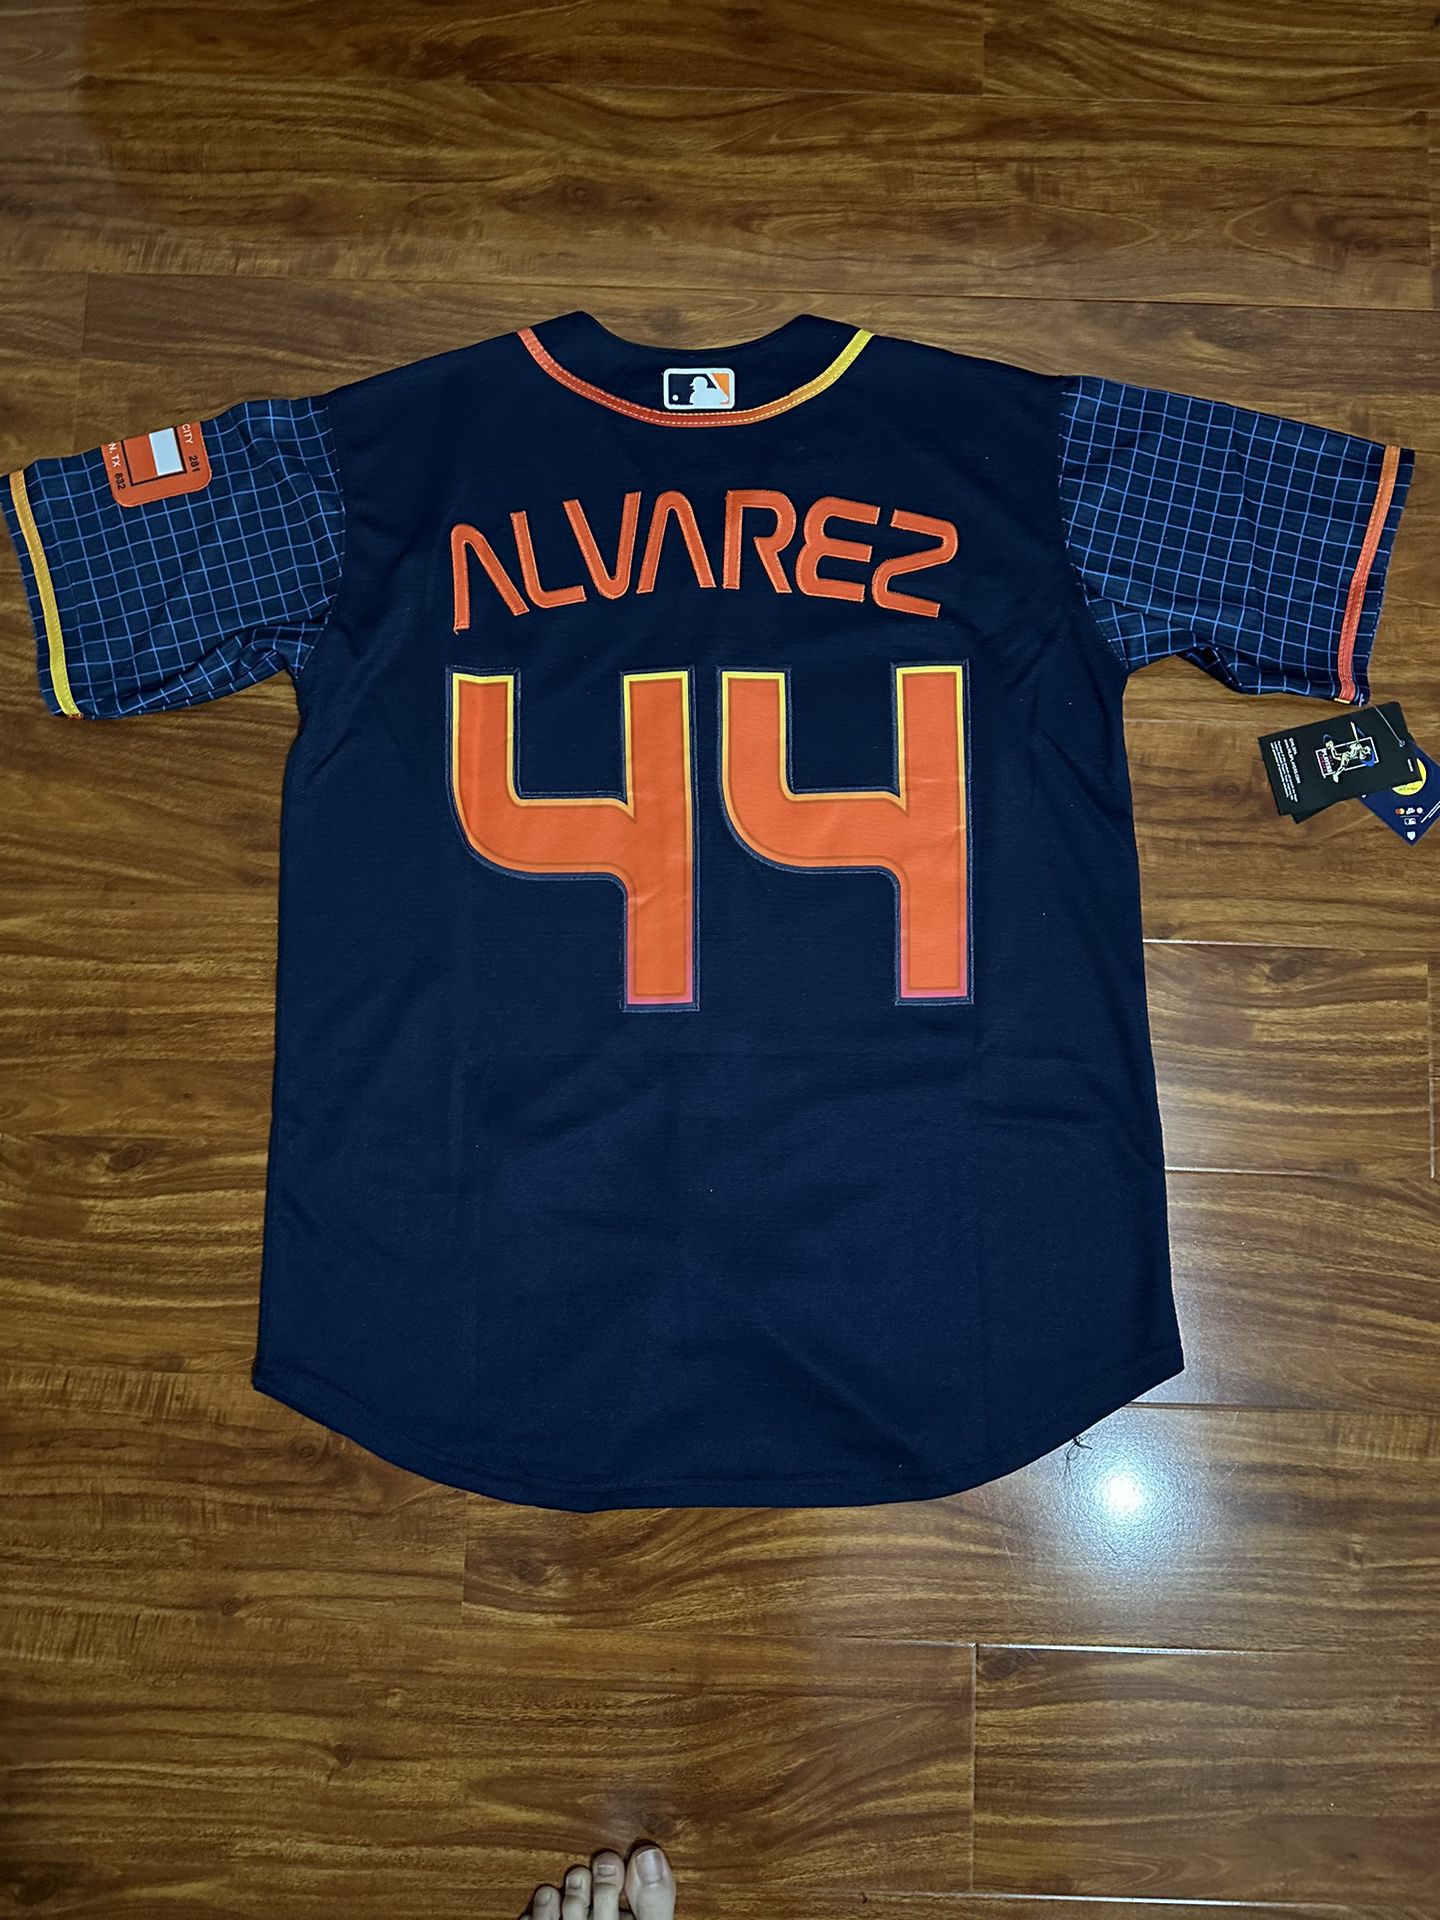 Custom Still Tippin June 27th Besomeone Astros And Texans Jerseys for Sale  in Spring, TX - OfferUp